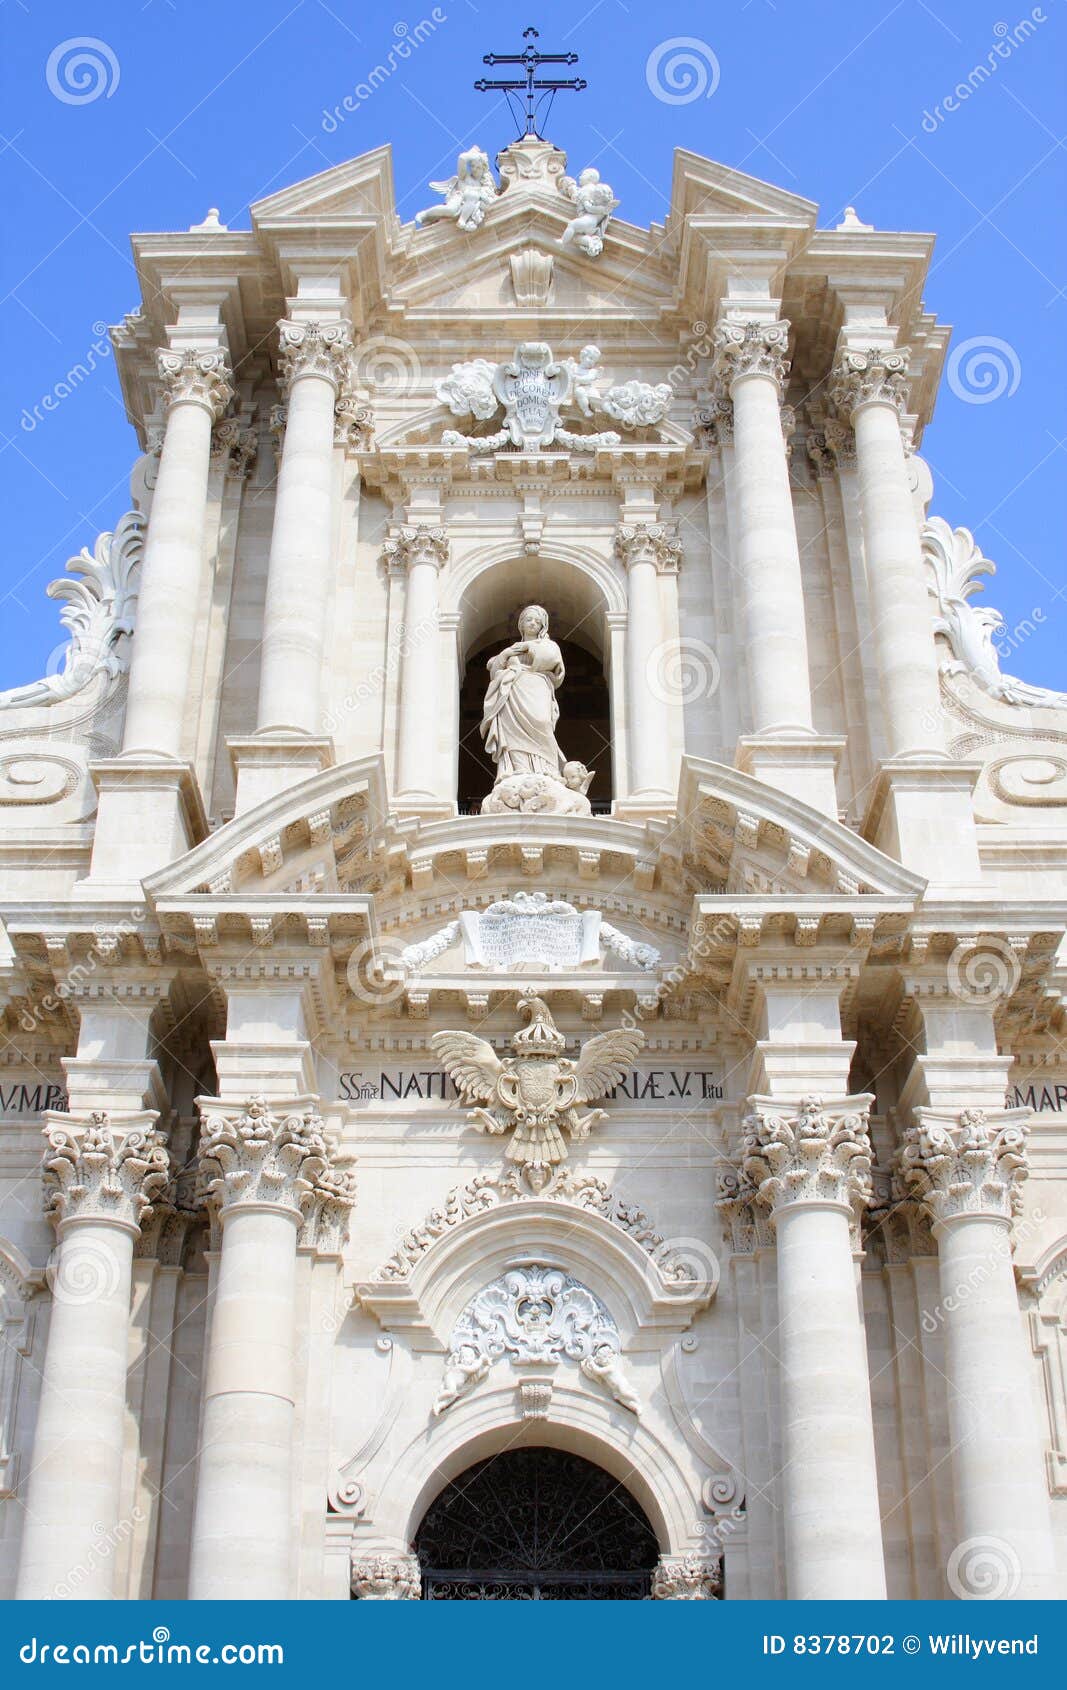 cathedral faÃÂ§ade of syracuse, italy